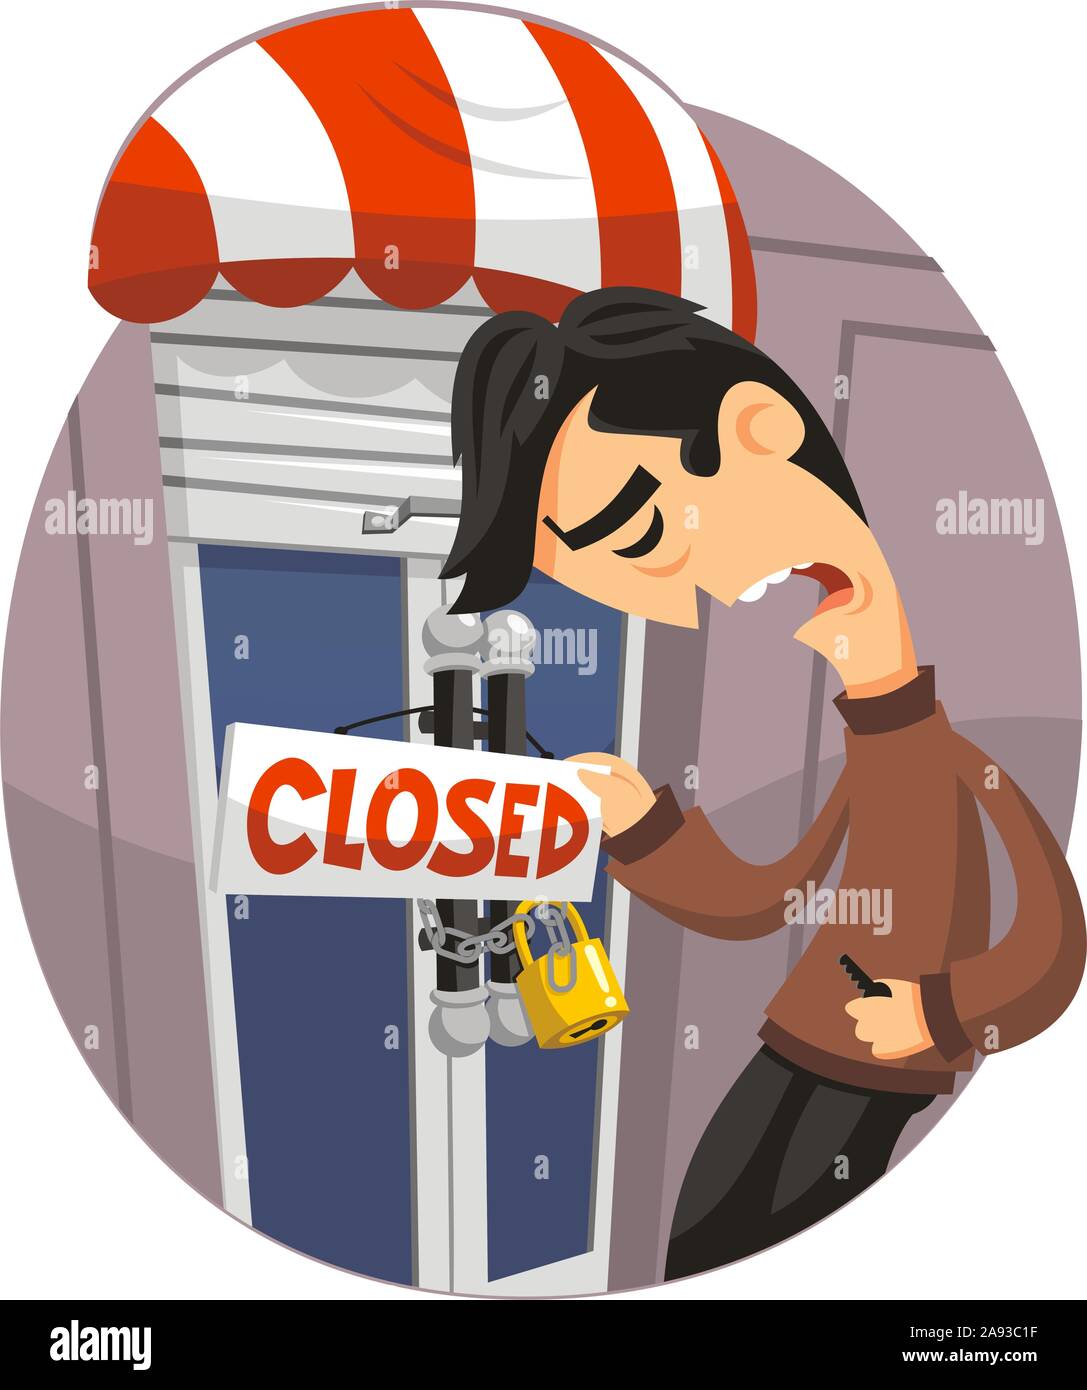 Man closing his shop going out of business Stock Vector